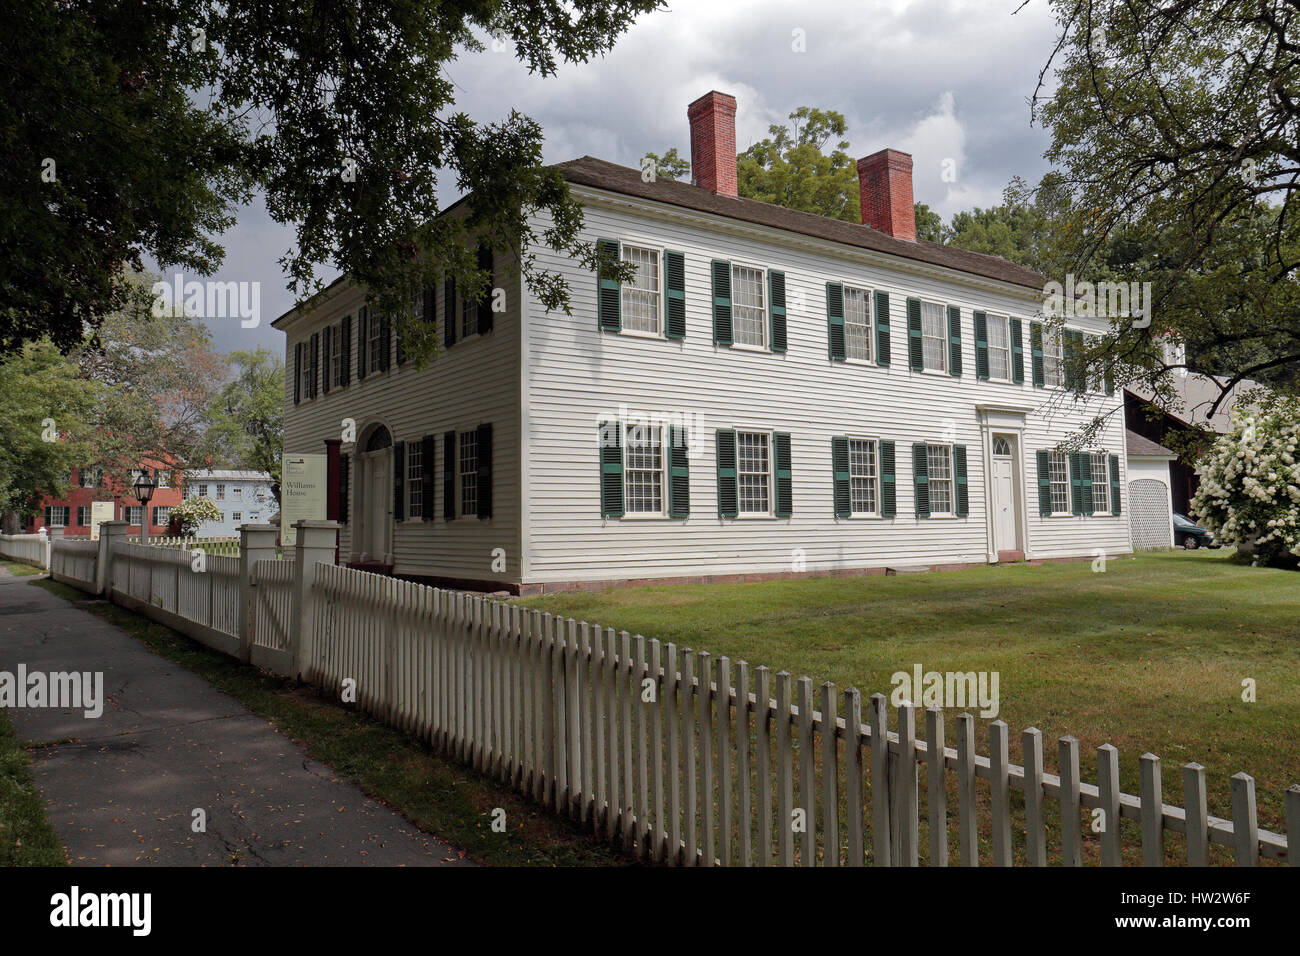 The Williams House from 1730 in Historic Deerfield, Franklin County, Massachusetts, United States. Stock Photo